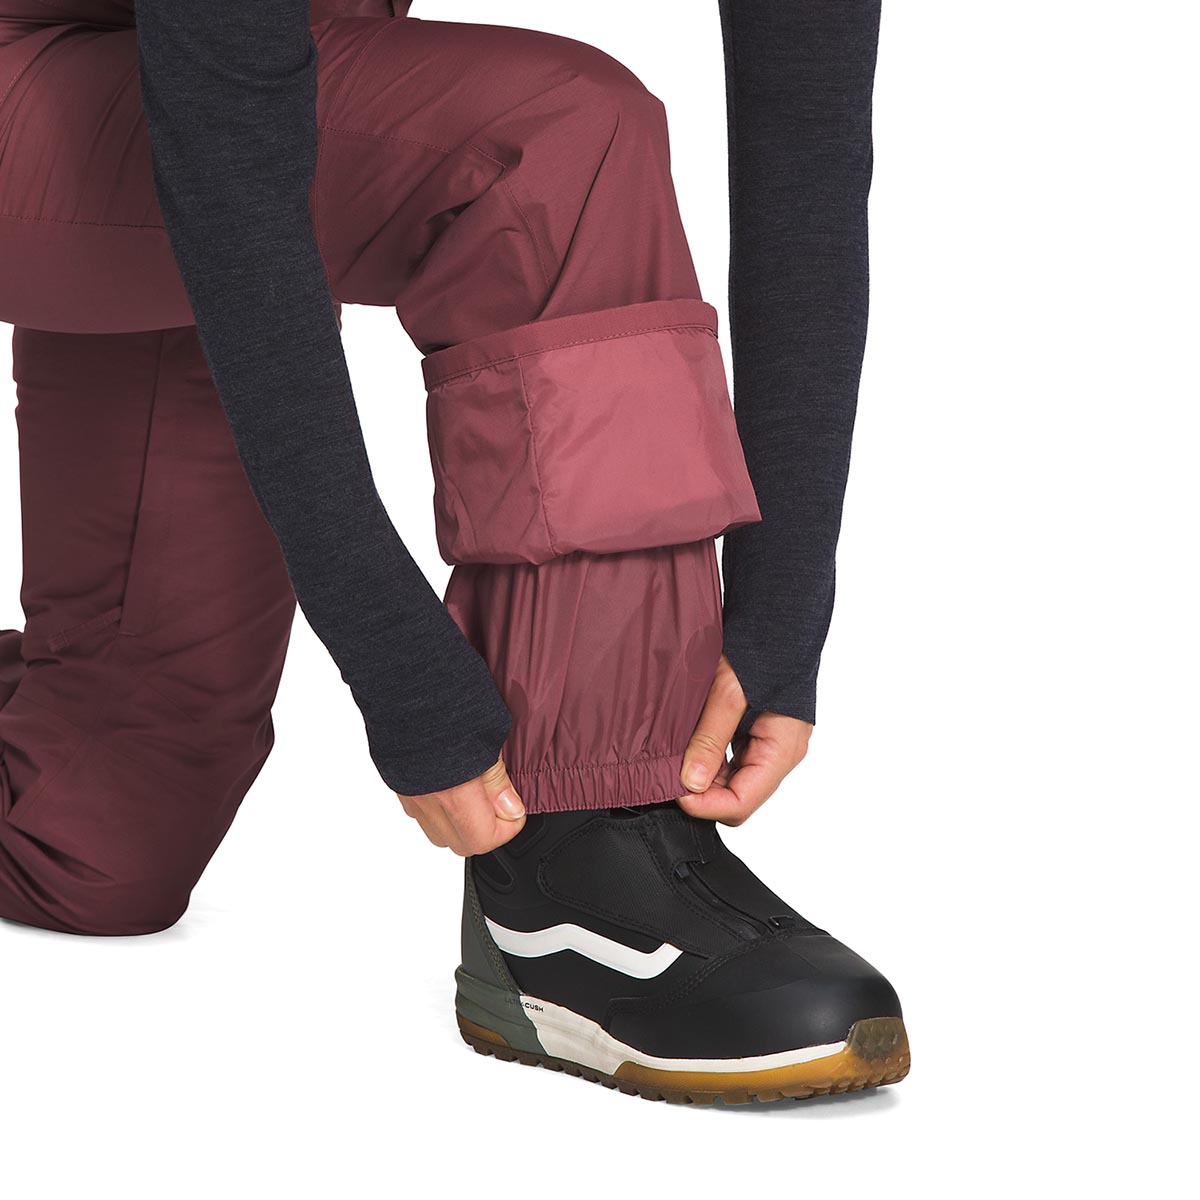 THE NORTH FACE - FREEDOM BIB TROUSERS